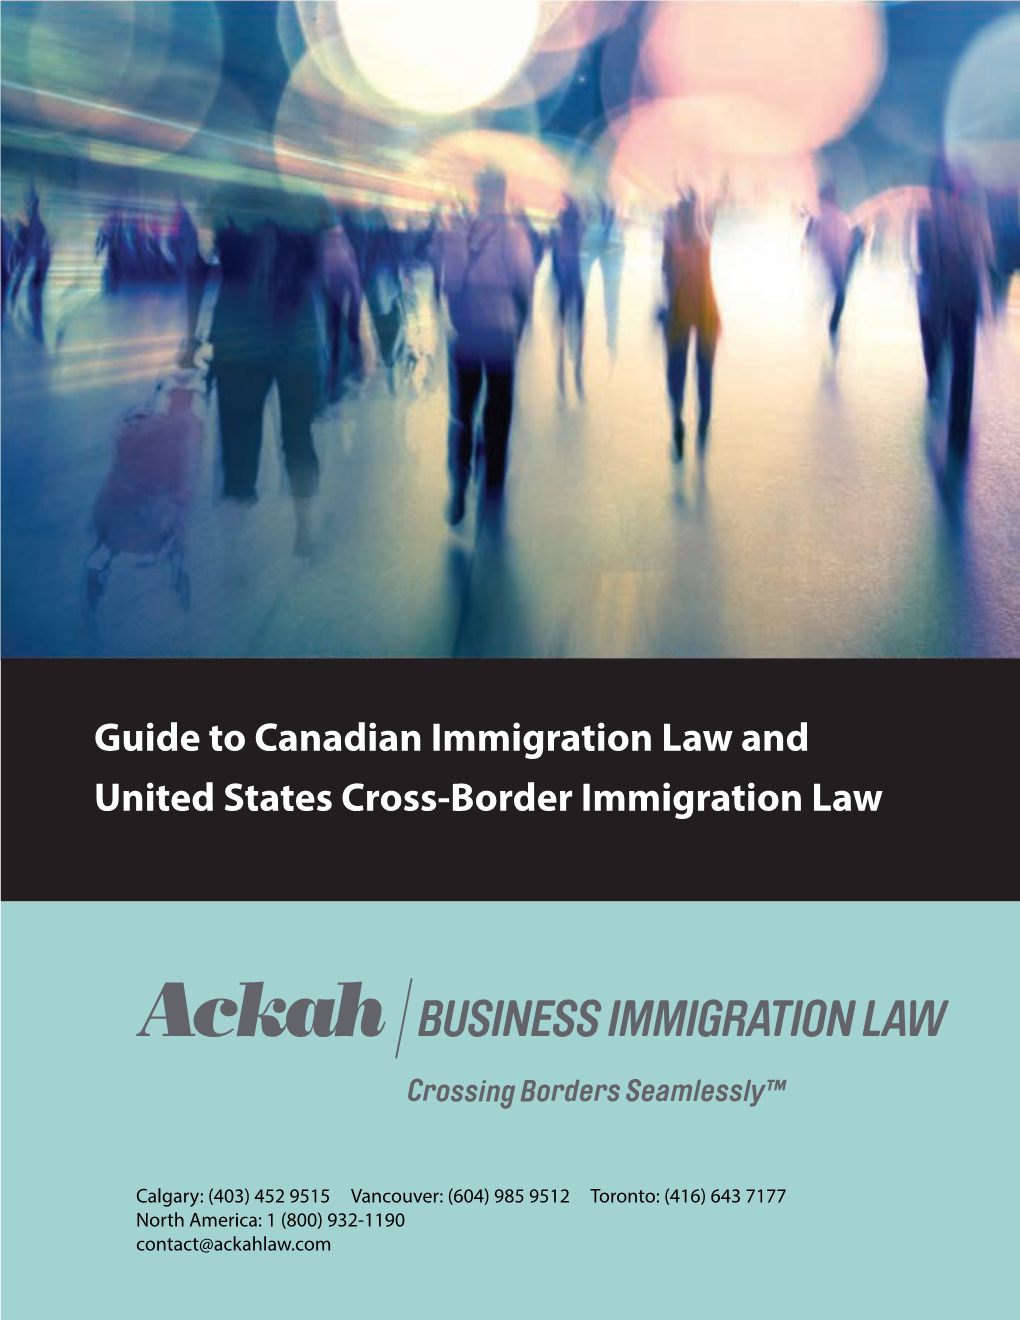 Guide to Canadian Immigration Law and United States Cross-Border Immigration Law